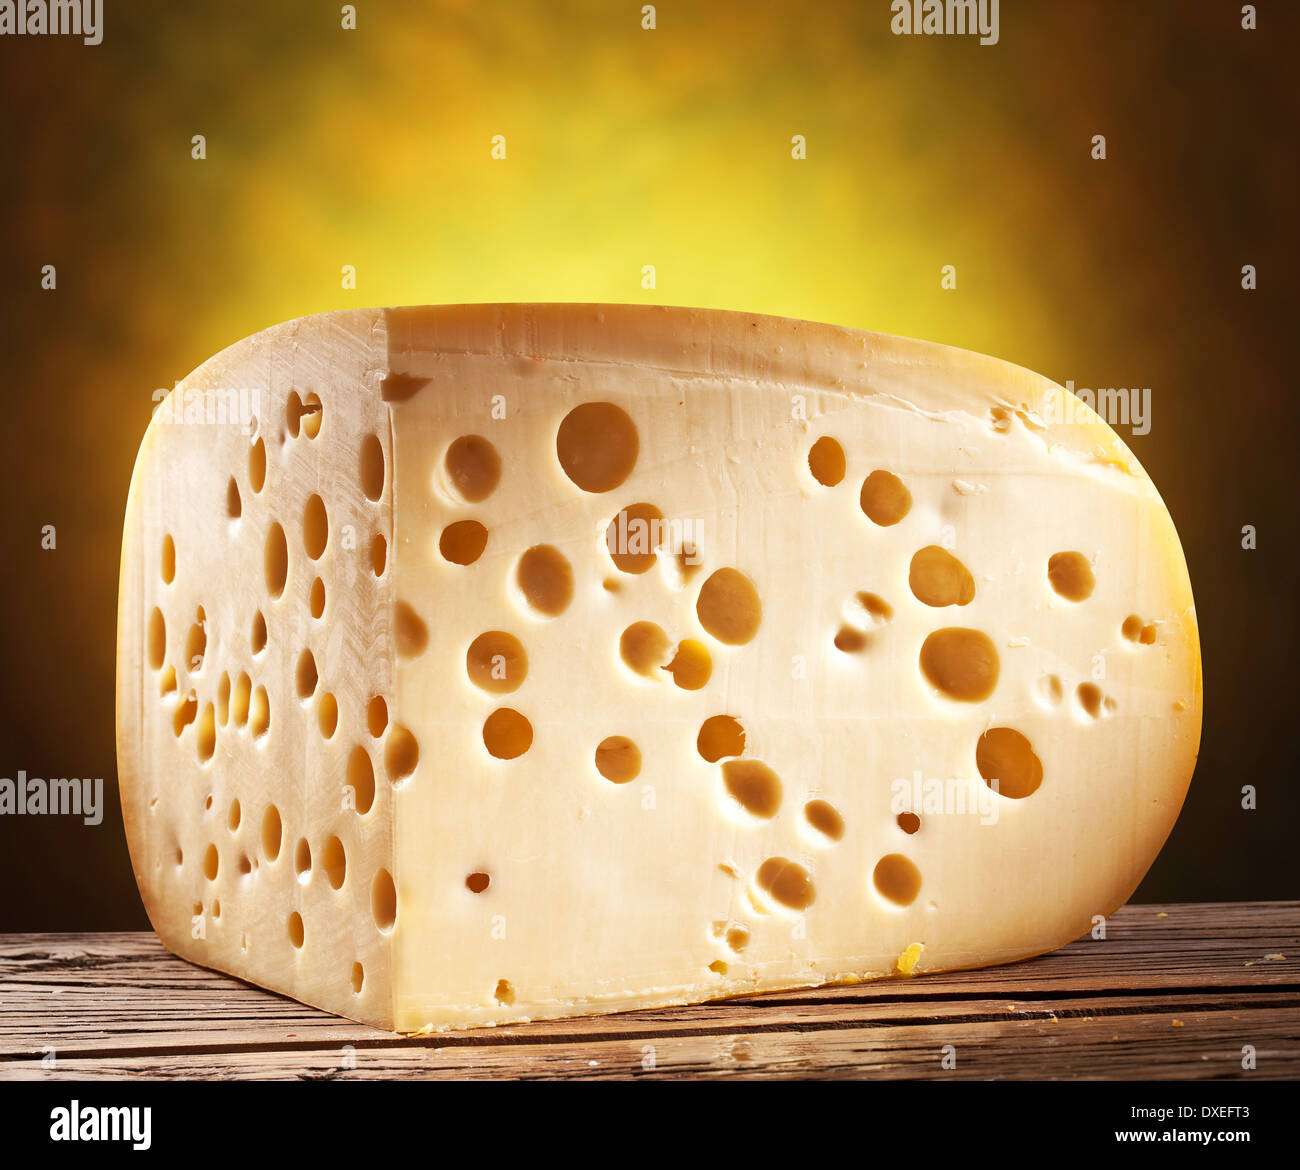 Quarter of Emmental cheese head on wooden table. Stock Photo